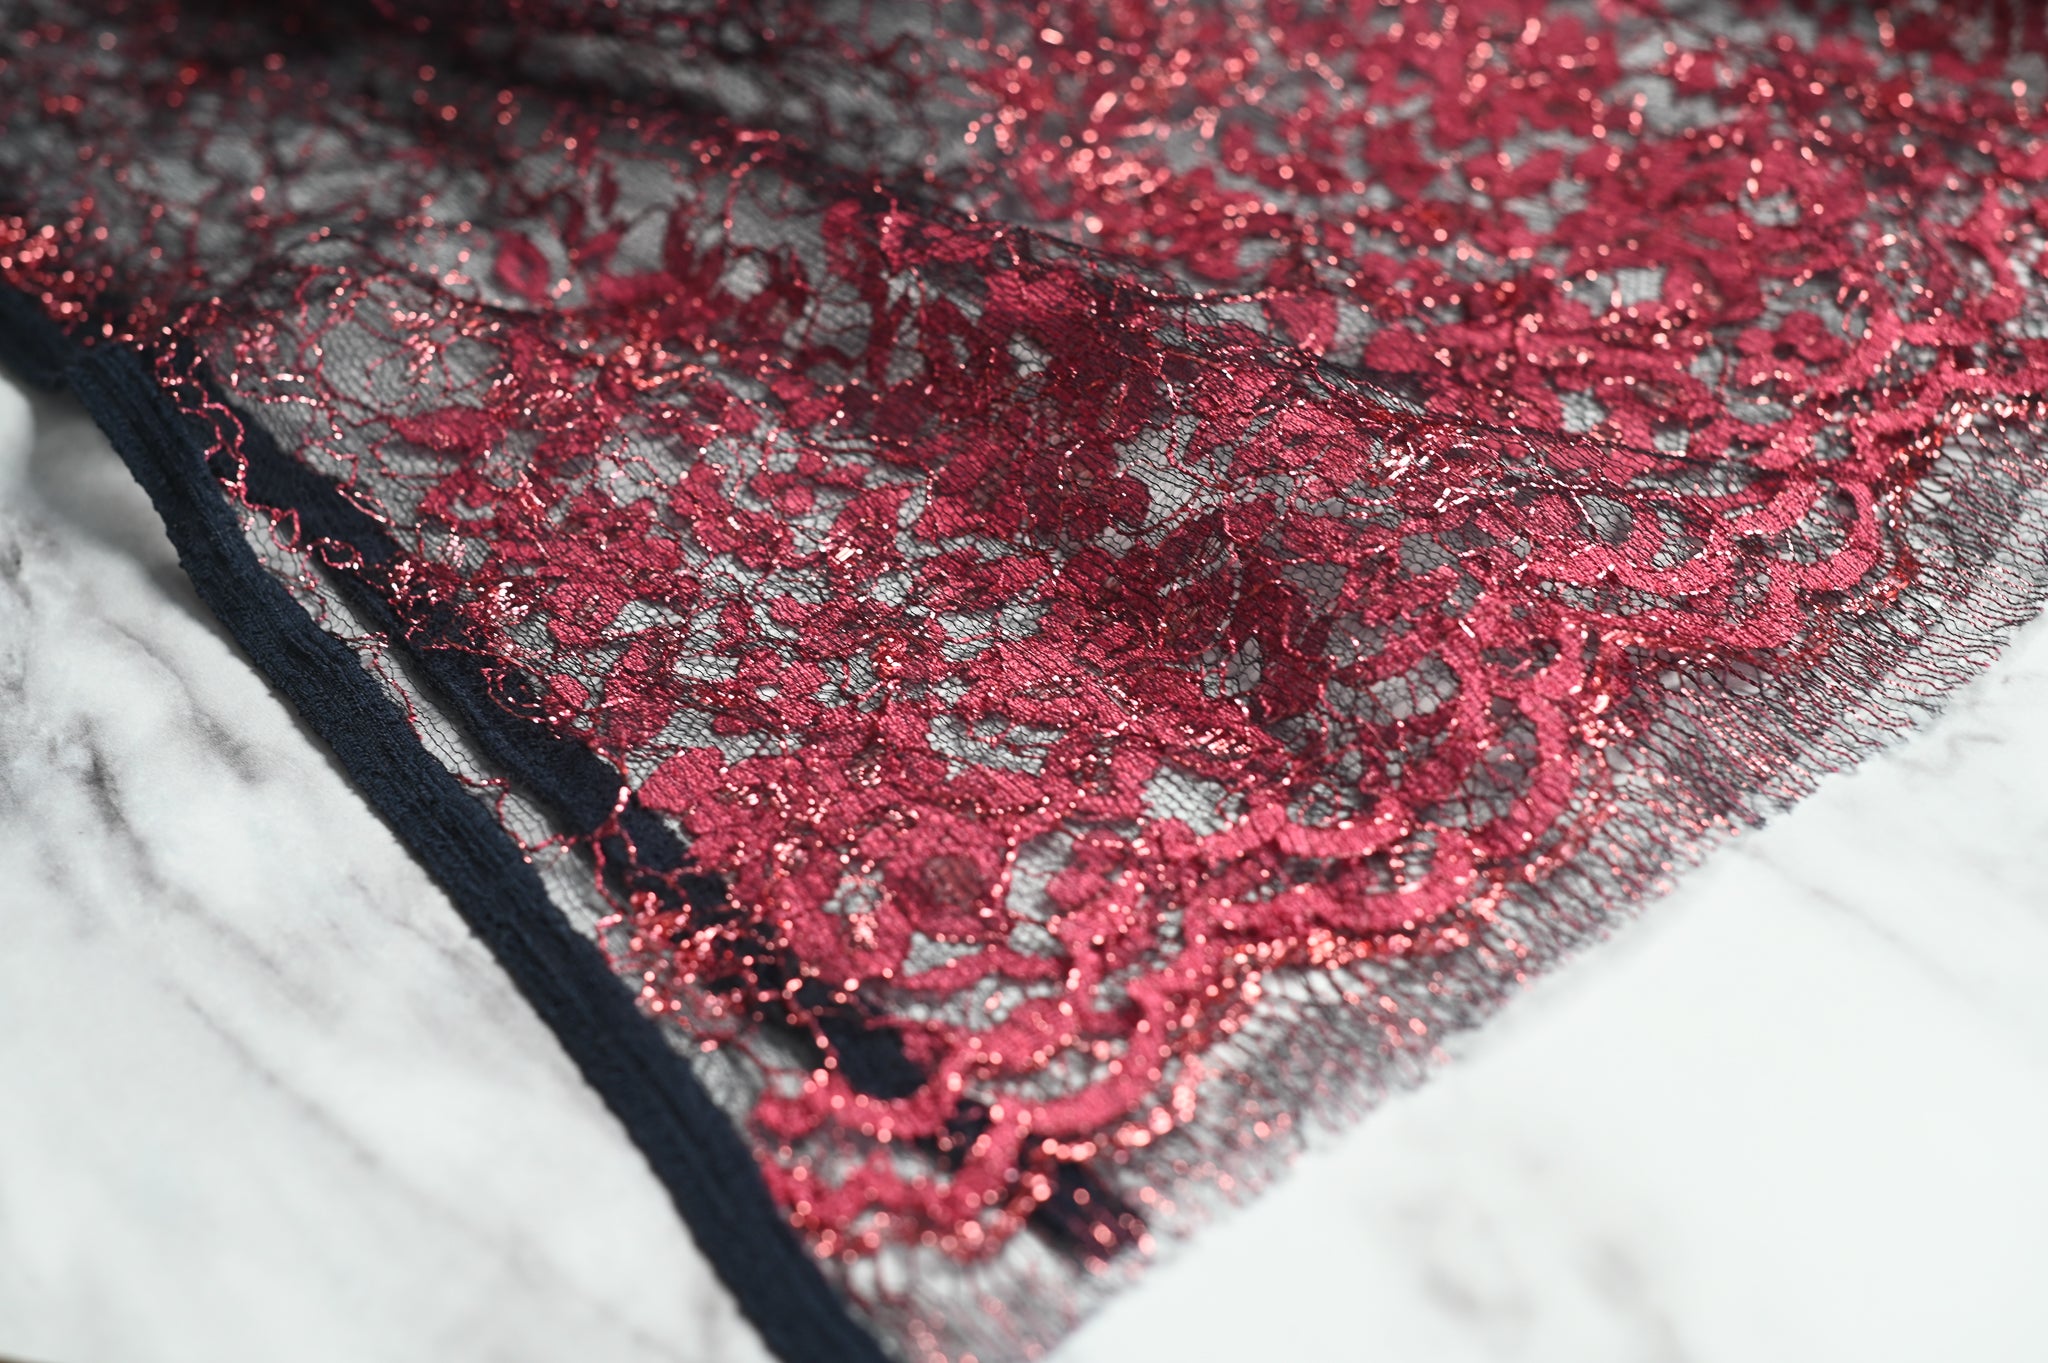 French Delicate Beauty (Shades of Red) - Viscose Polyamide